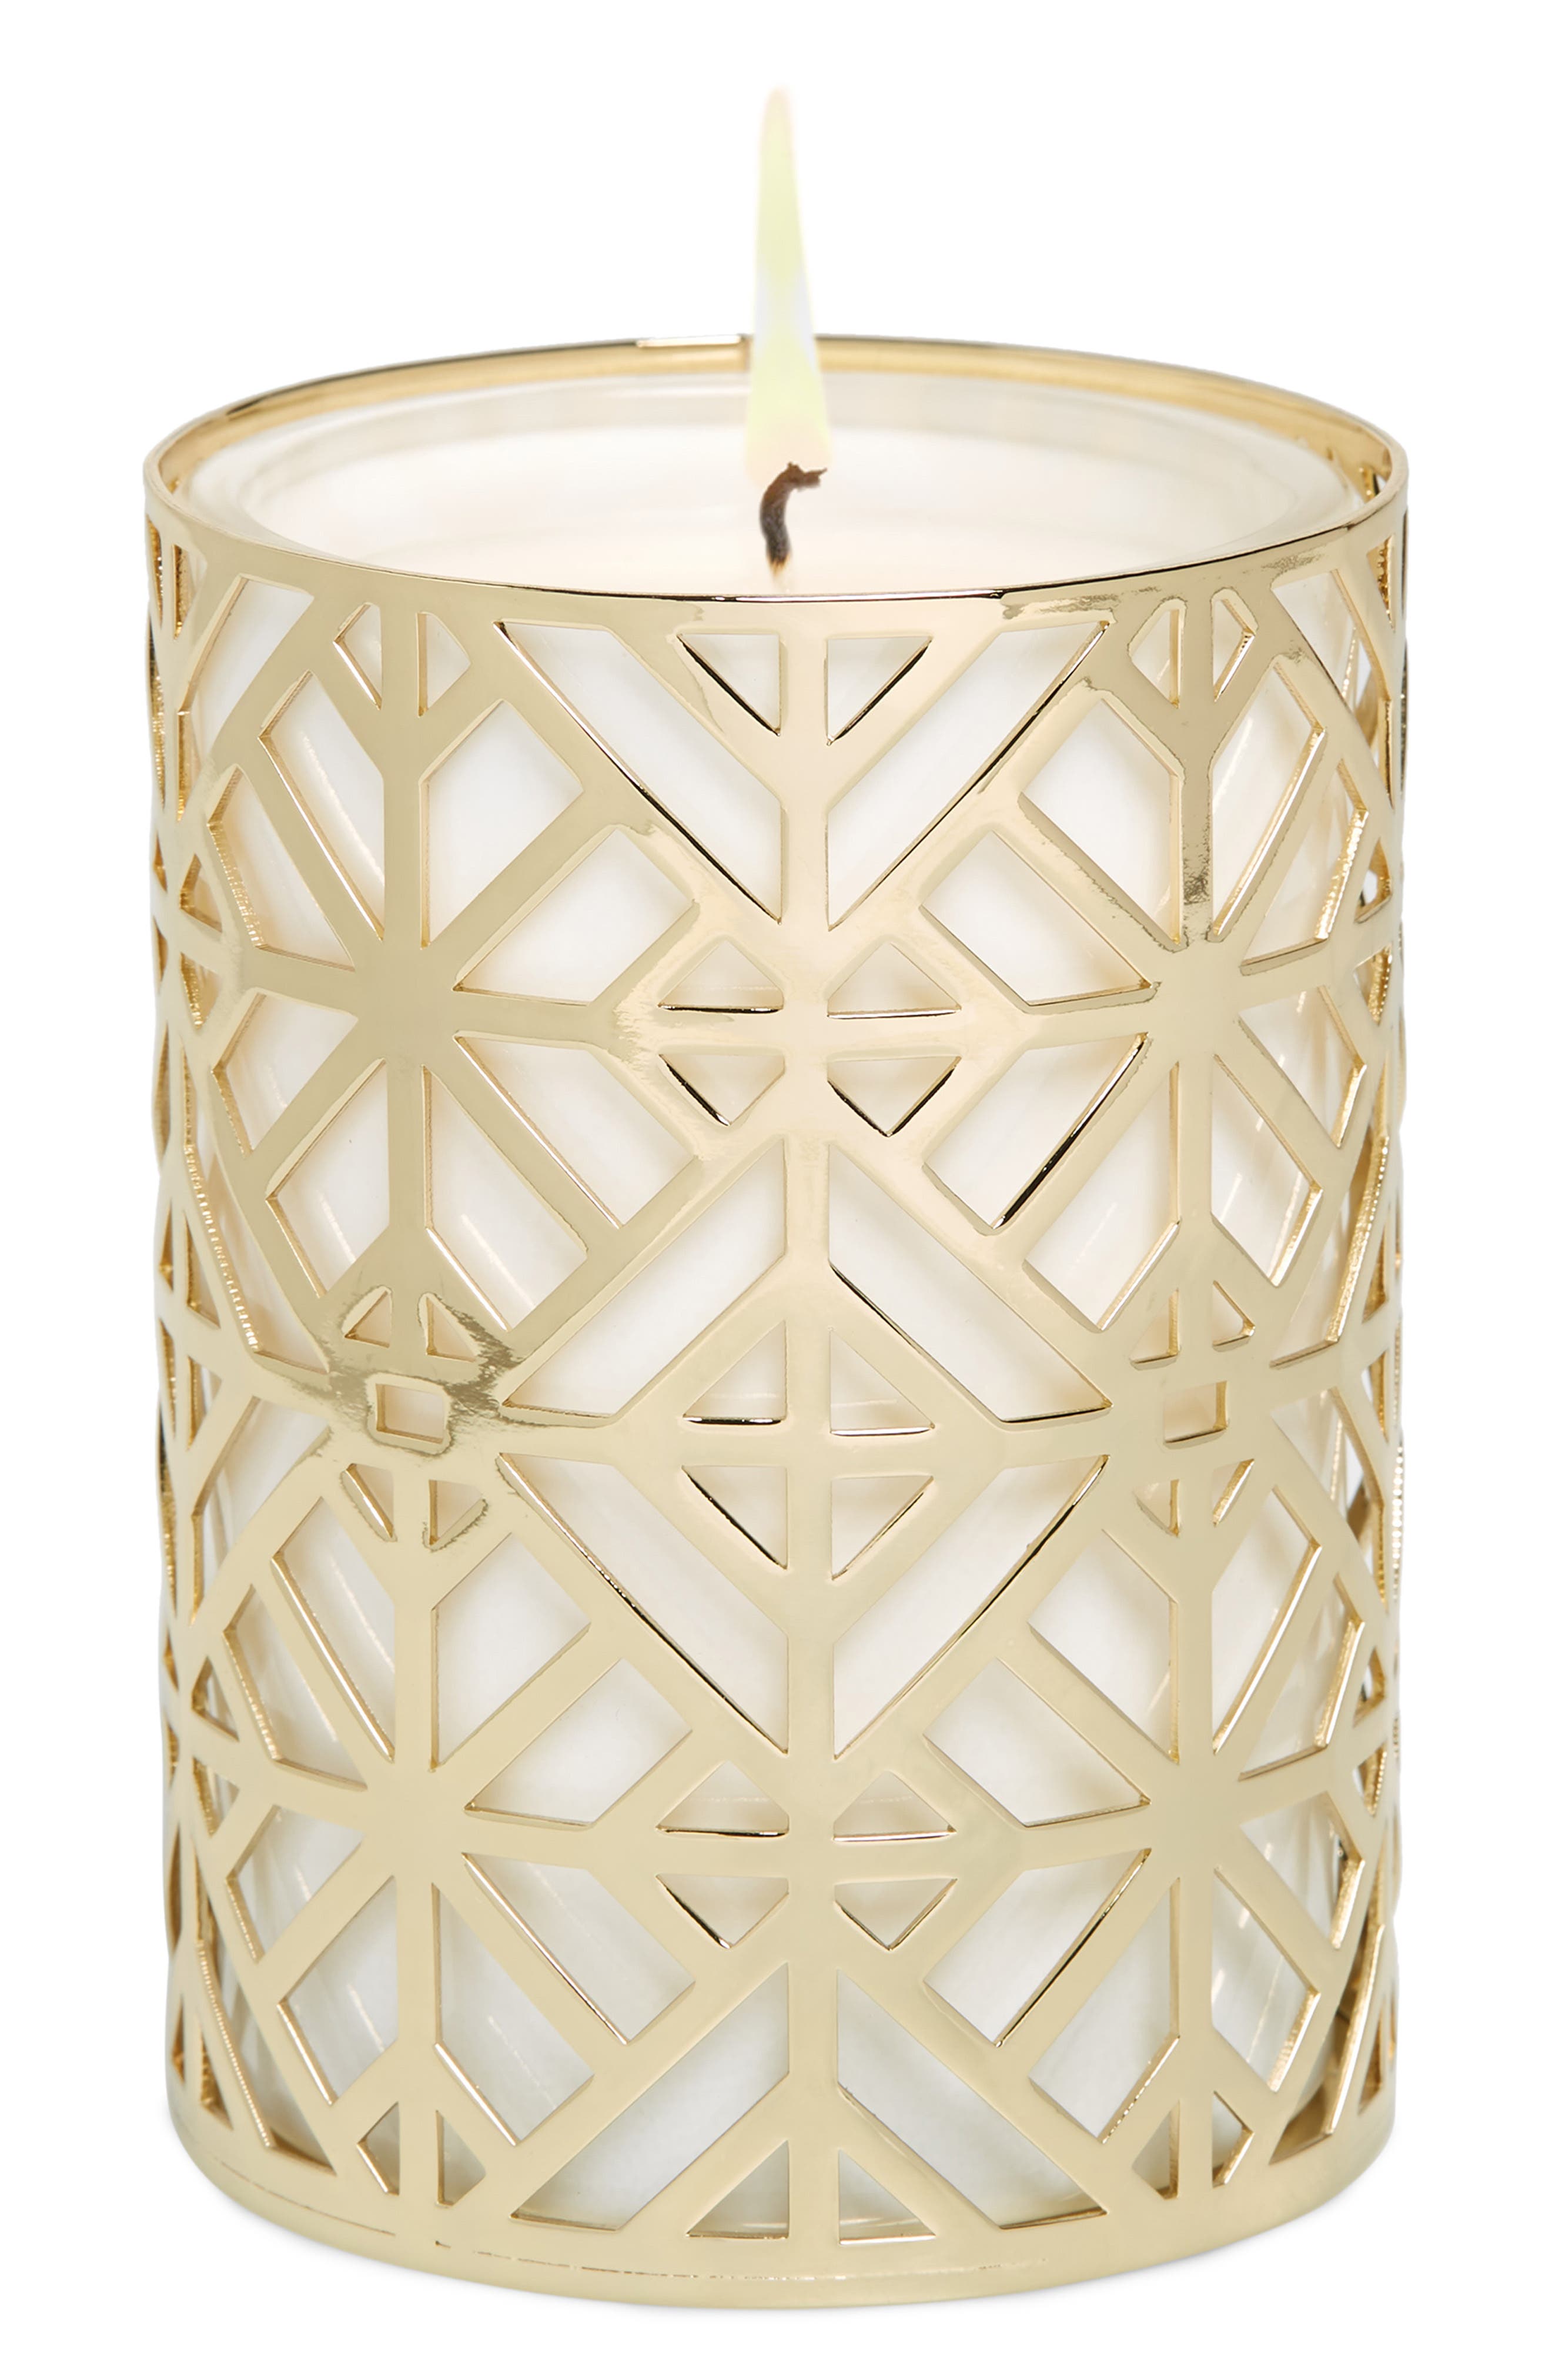 Tory Burch Cedarwood Candle in Metallic Gold at Nordstrom